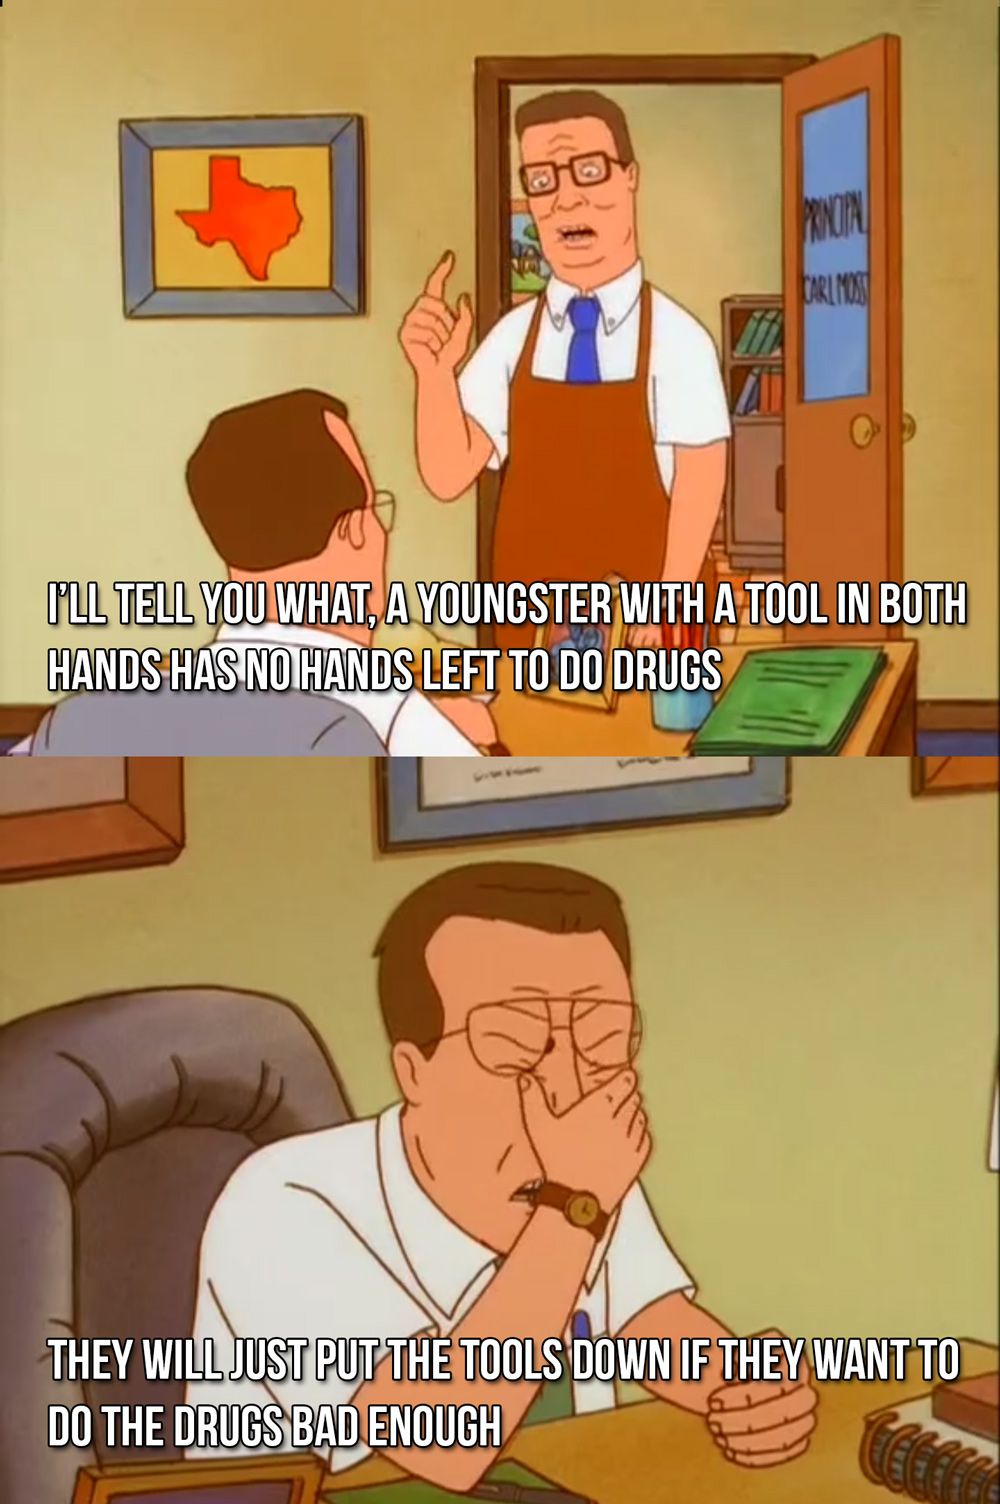 Came here to post a King of the Hill quote and oddly enough there is already one on the front page. But I also miss King of the Hill...